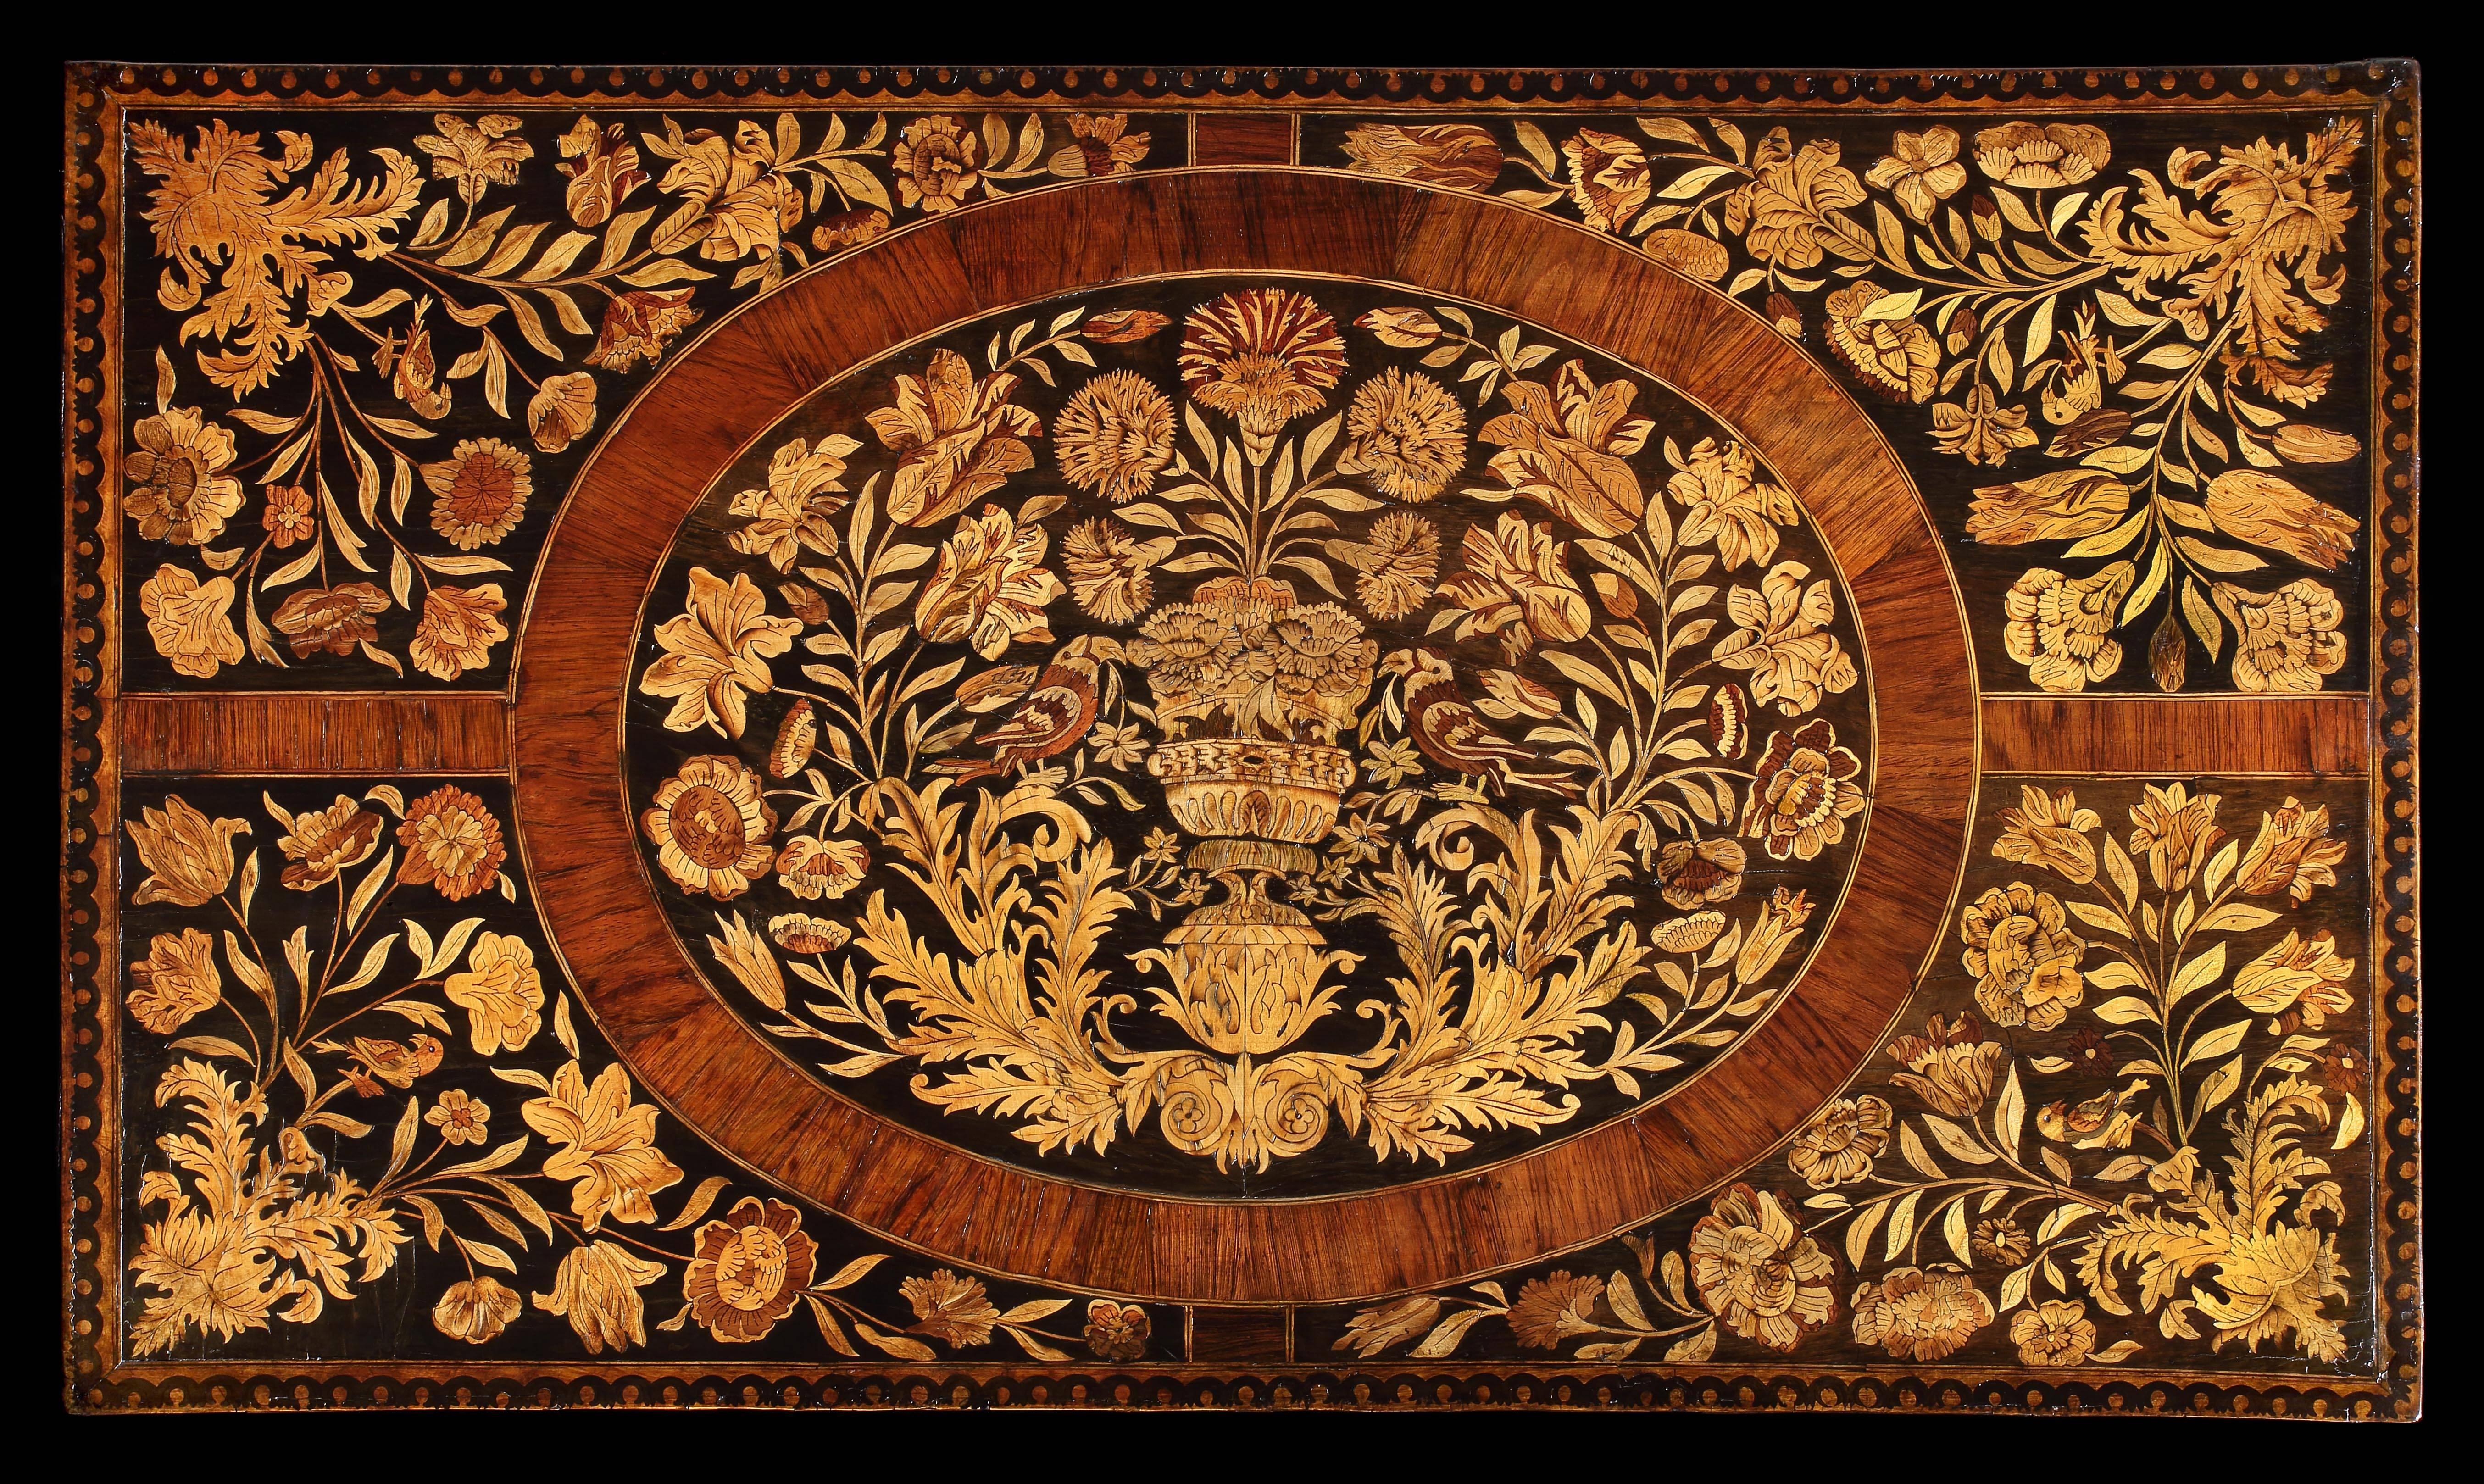 A very fine William & Mary marquetry chest of drawers with elaborate floral marquetry. The rectangular moulded top profusely inlaid with floral marquetry incorporating birds and an urn, with walnut strapwork and inlaid border, the two short and